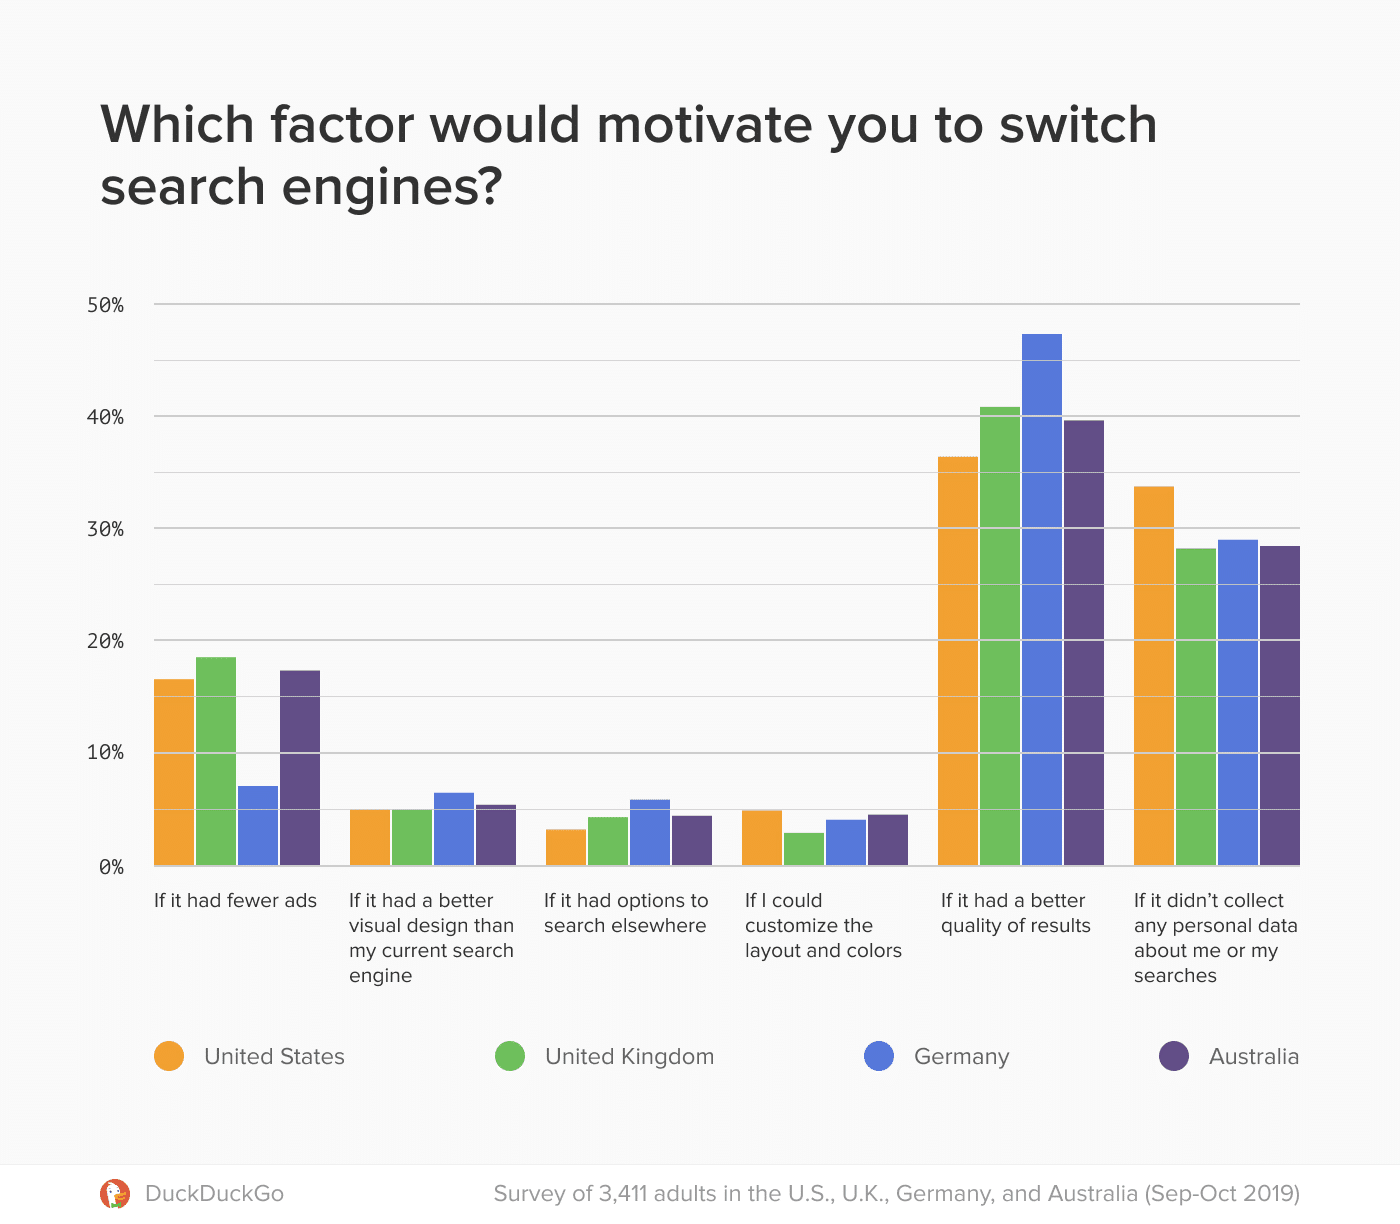 Factorst that motivate to switch search engines